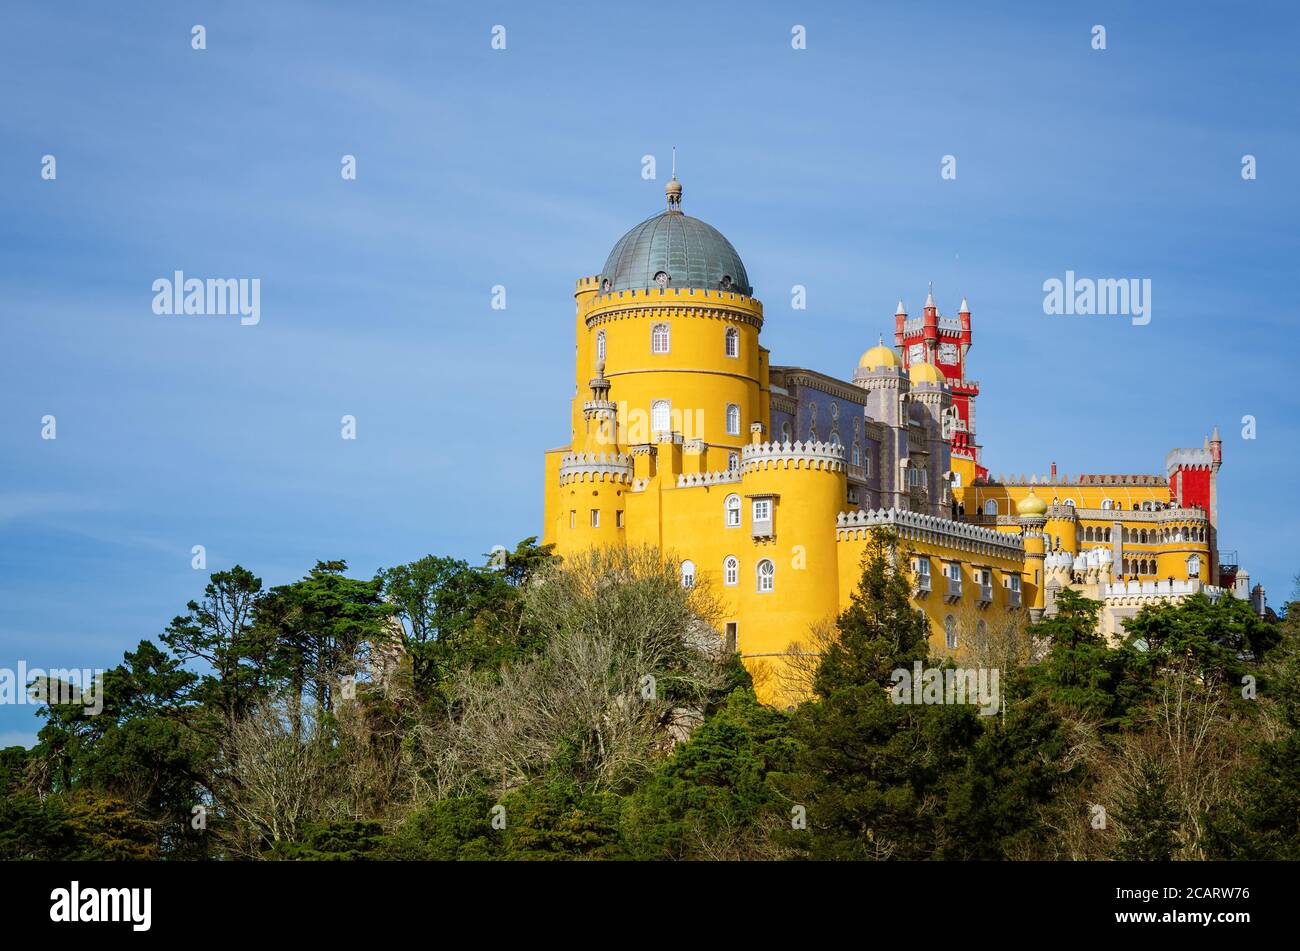 Sintra, Portugal - February 4, 2019: Far distant exterior view of the Pena Palace, famous colorful castle from the romantic age in Sintra, Portugal, o Stock Photo